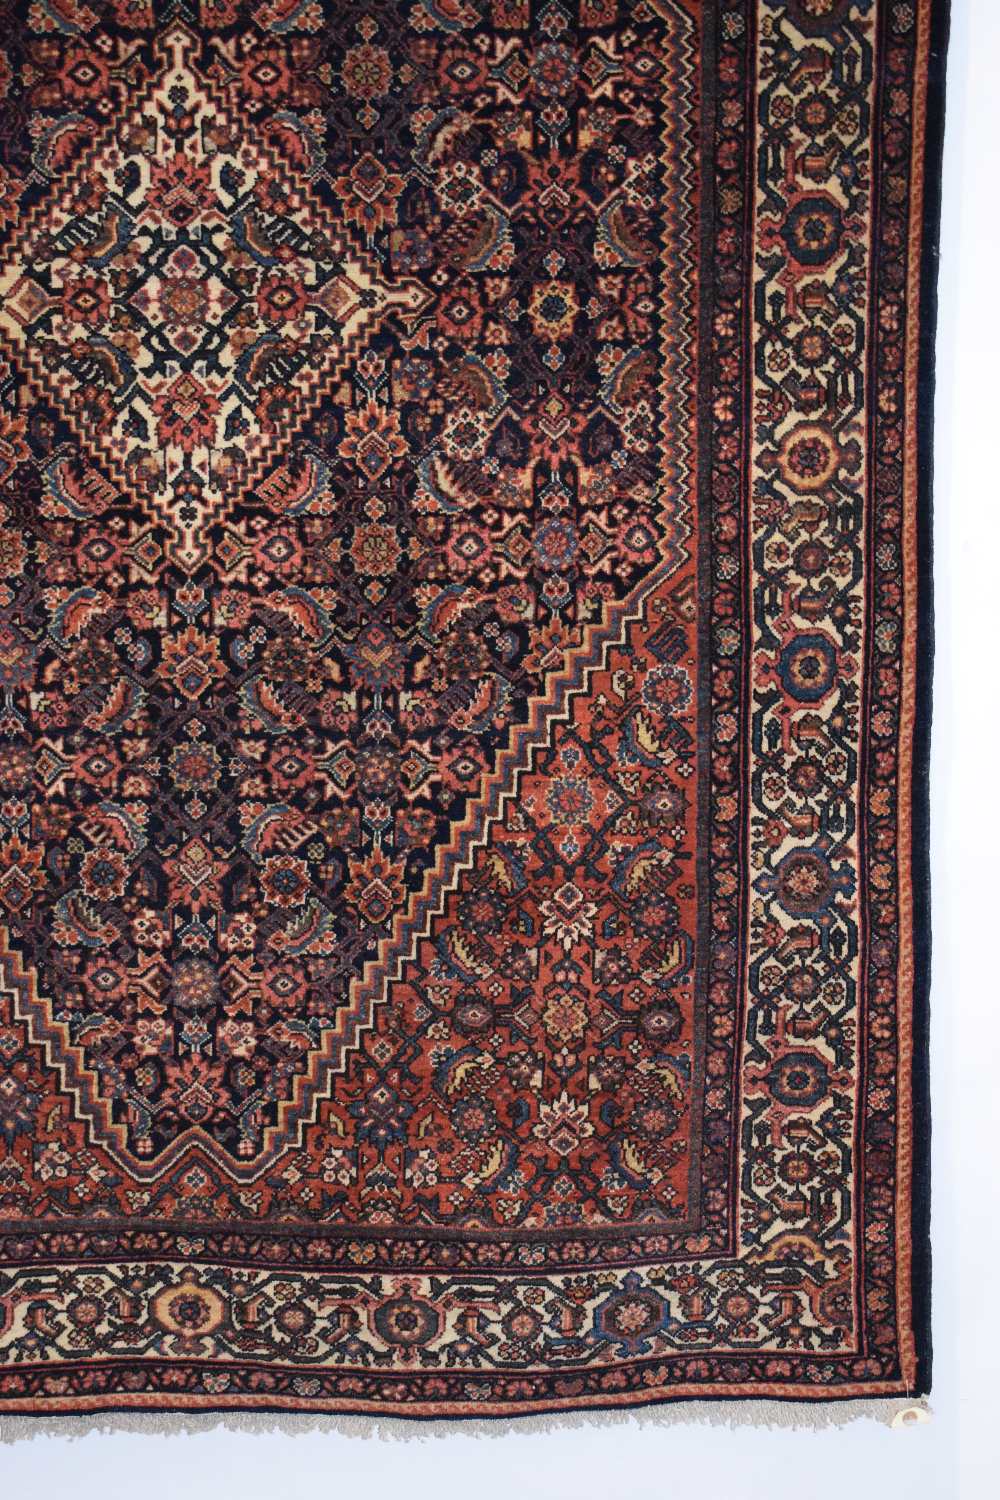 Feraghan rug, north west Persia, circa 1920s-30s, 6ft. 7in. X 4ft. 2in. 2.01m. x 1.27m. Dark blue - Image 2 of 10